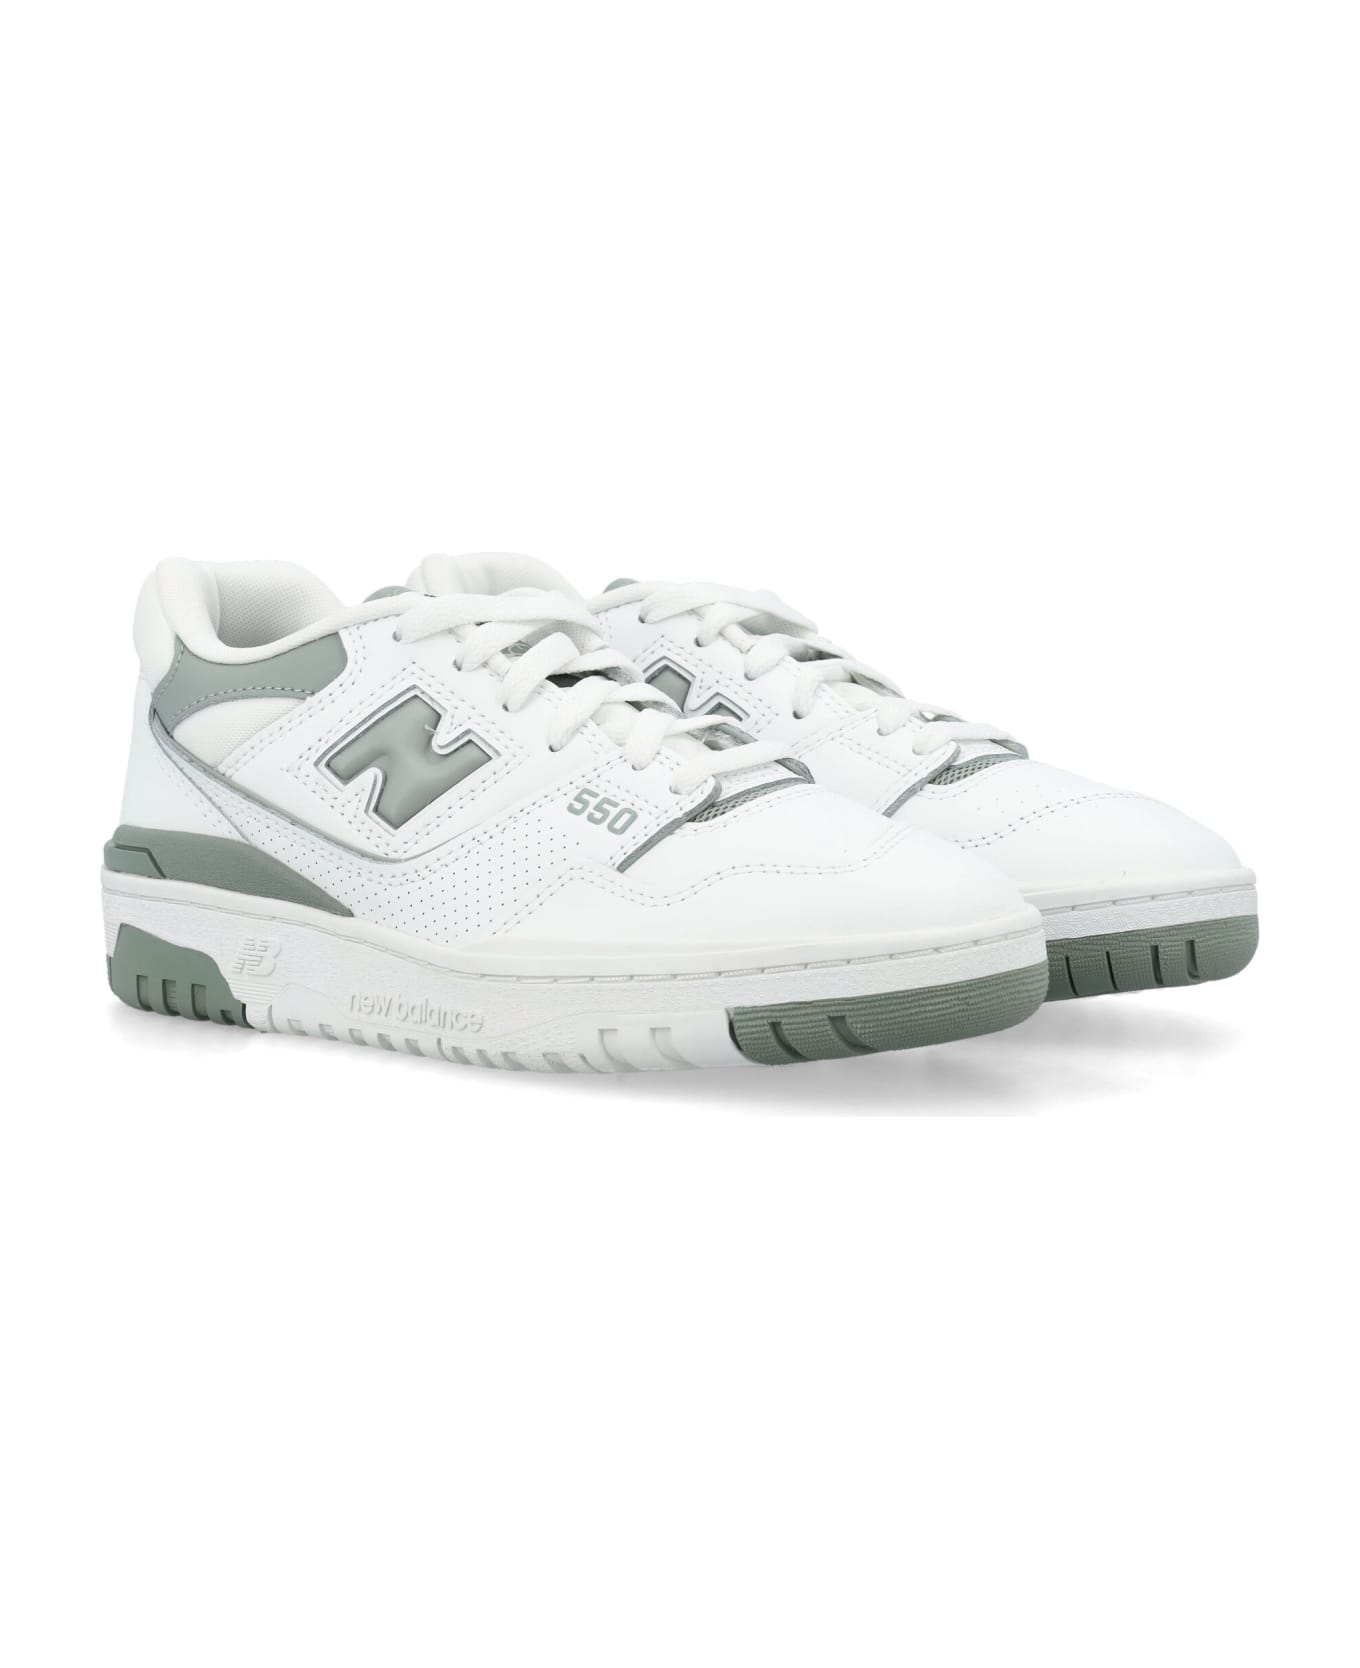 New Balance 550 Woman's Sneakers - WHITE GREEN スニーカー